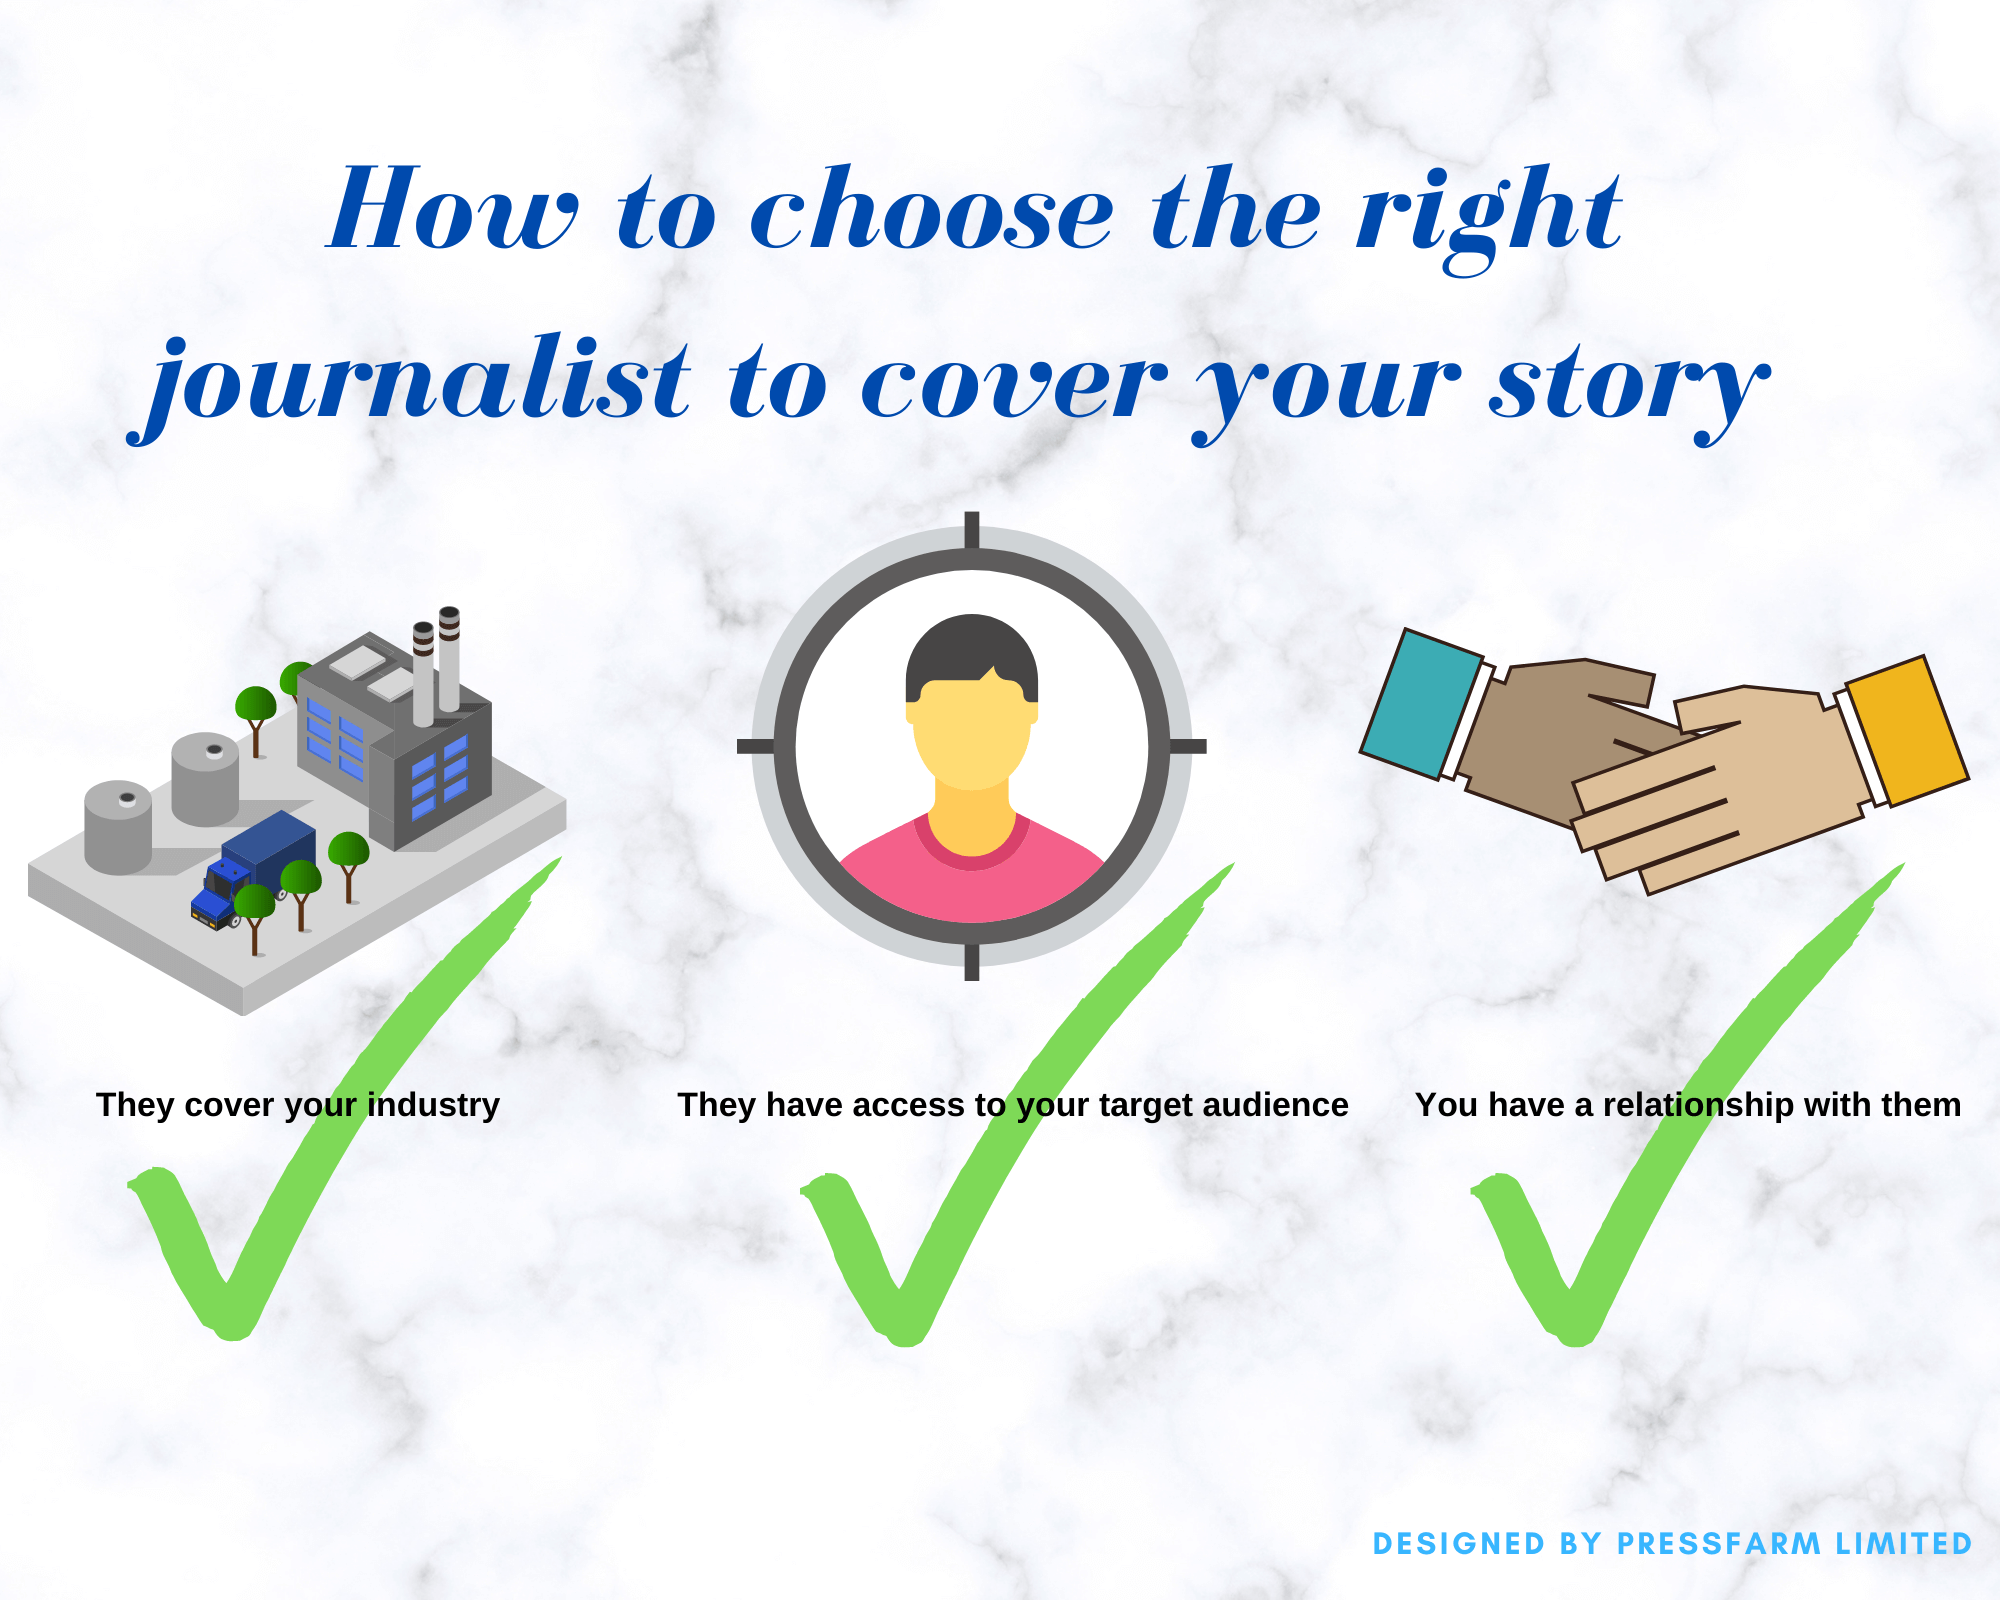 How to choose the right media journalist to cover your story